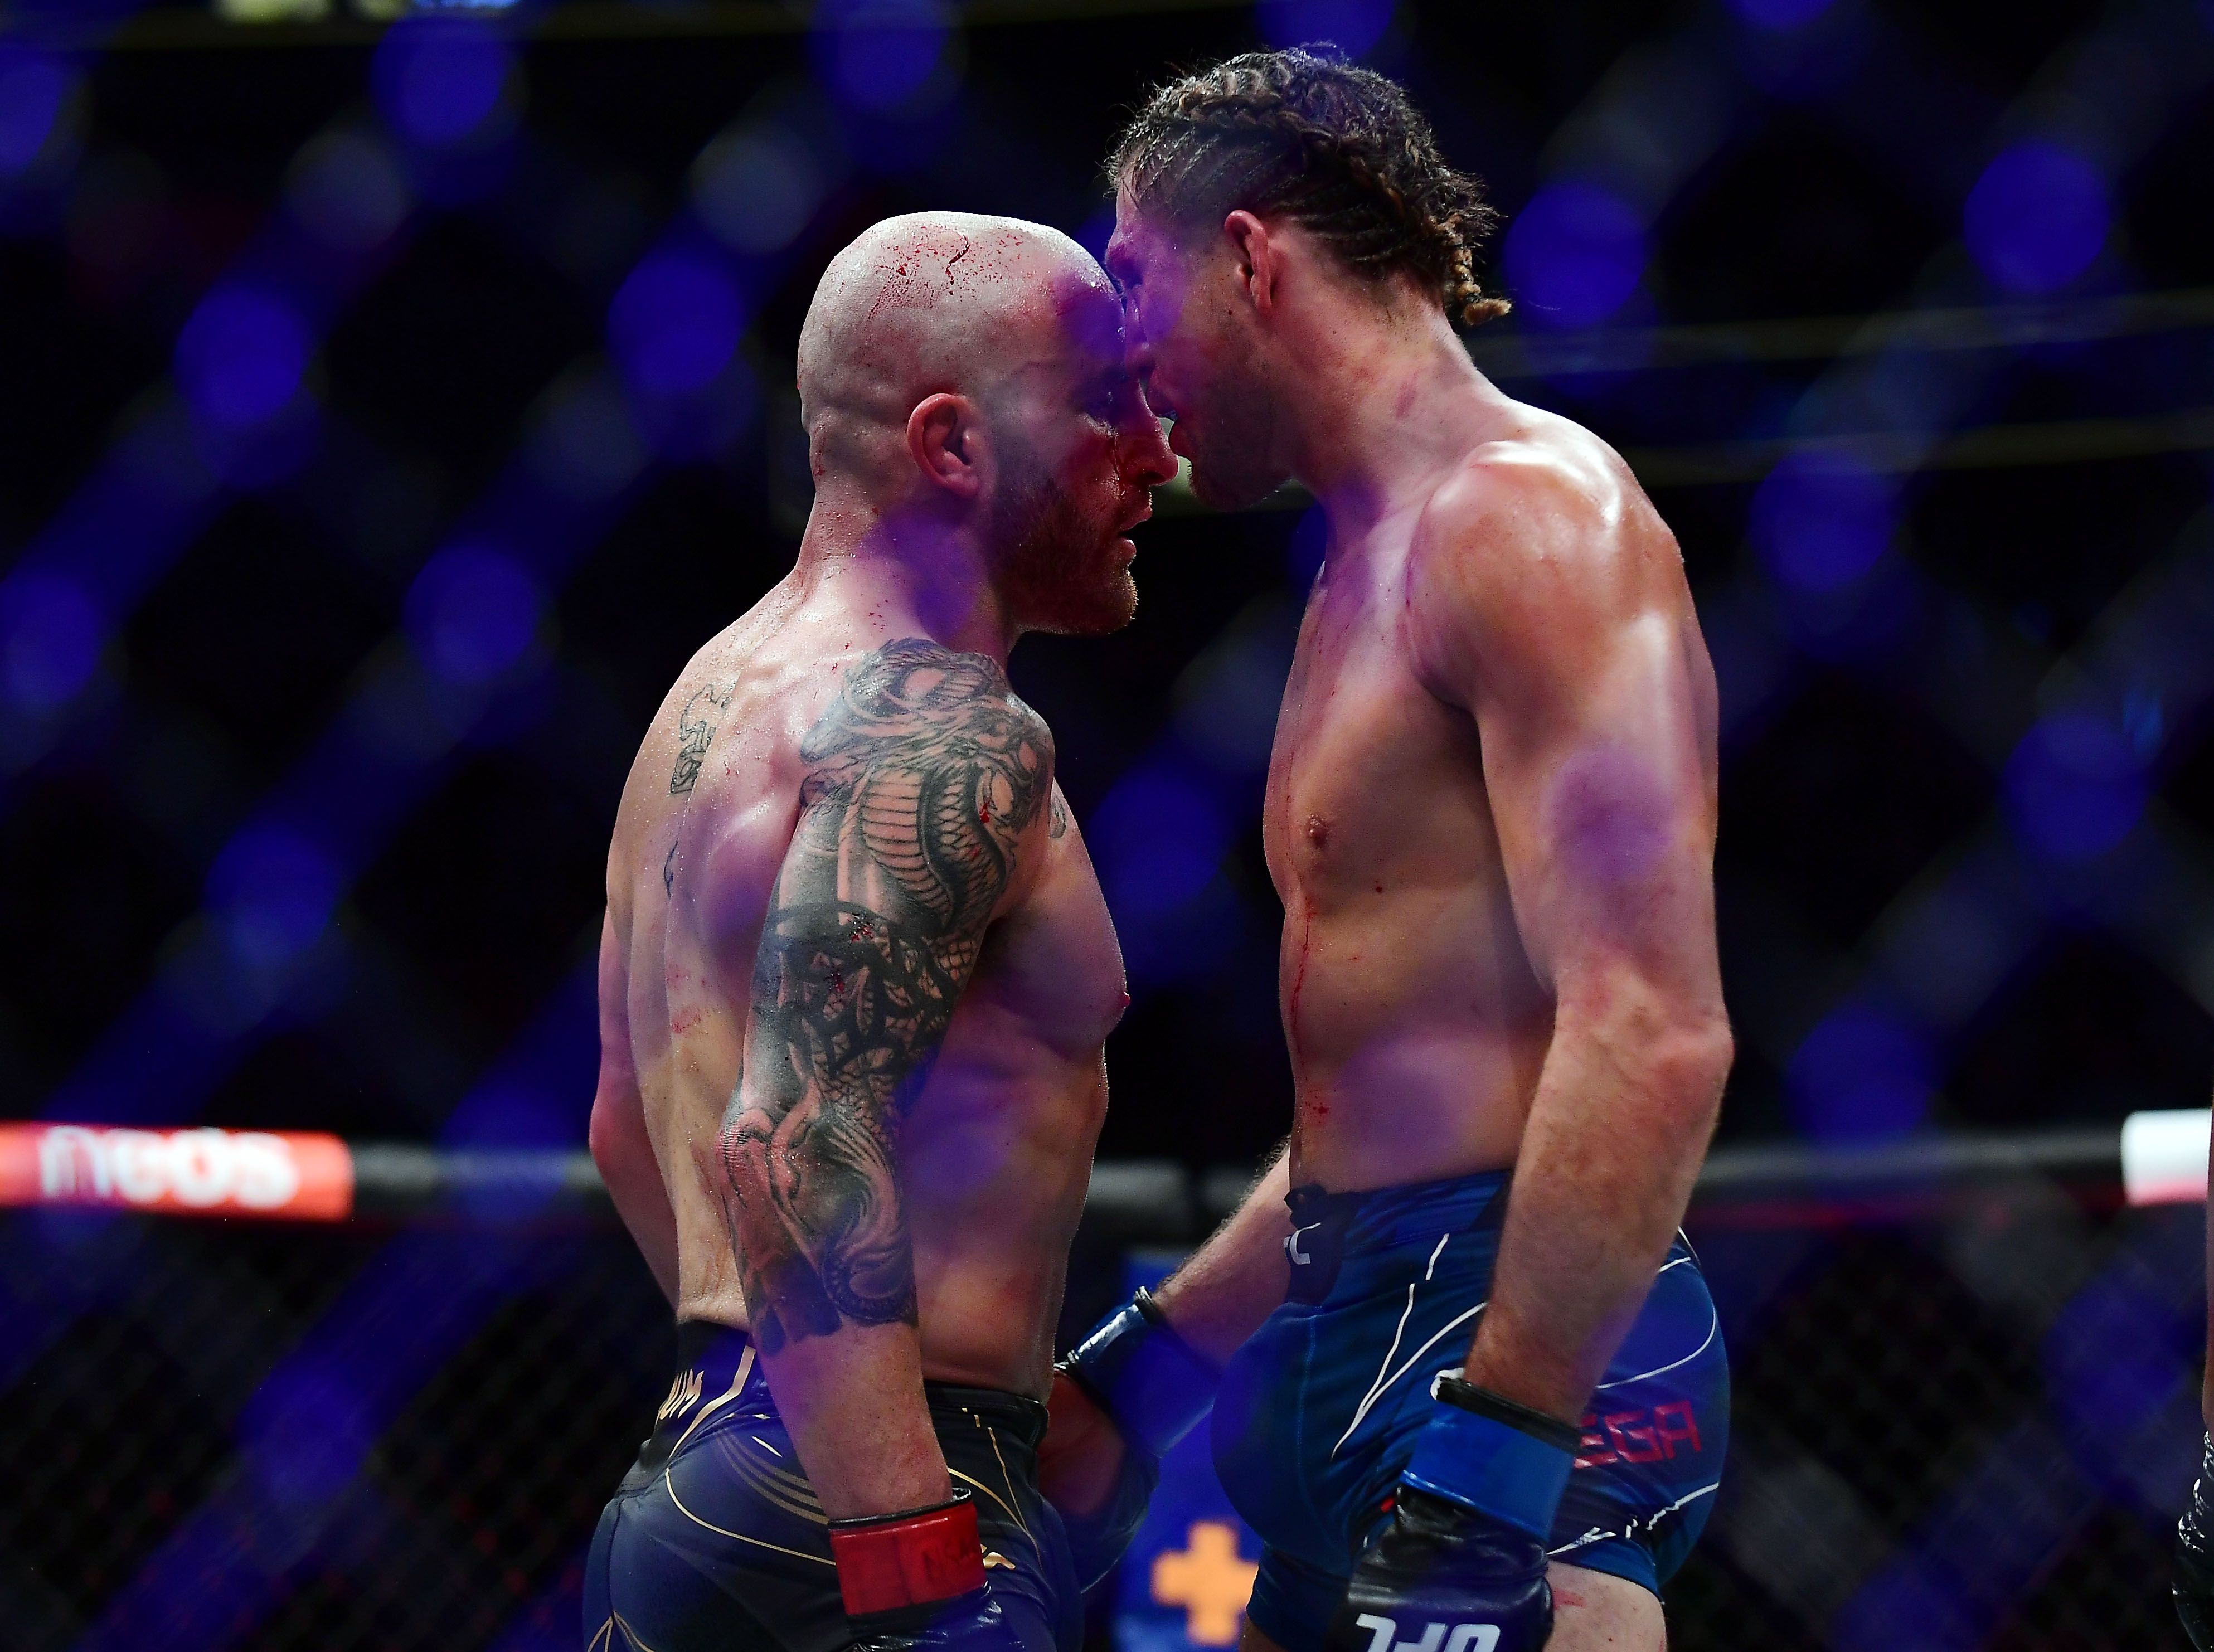 Volkanovski and Ortega showing respect after their incredible UFC 266 title fight.